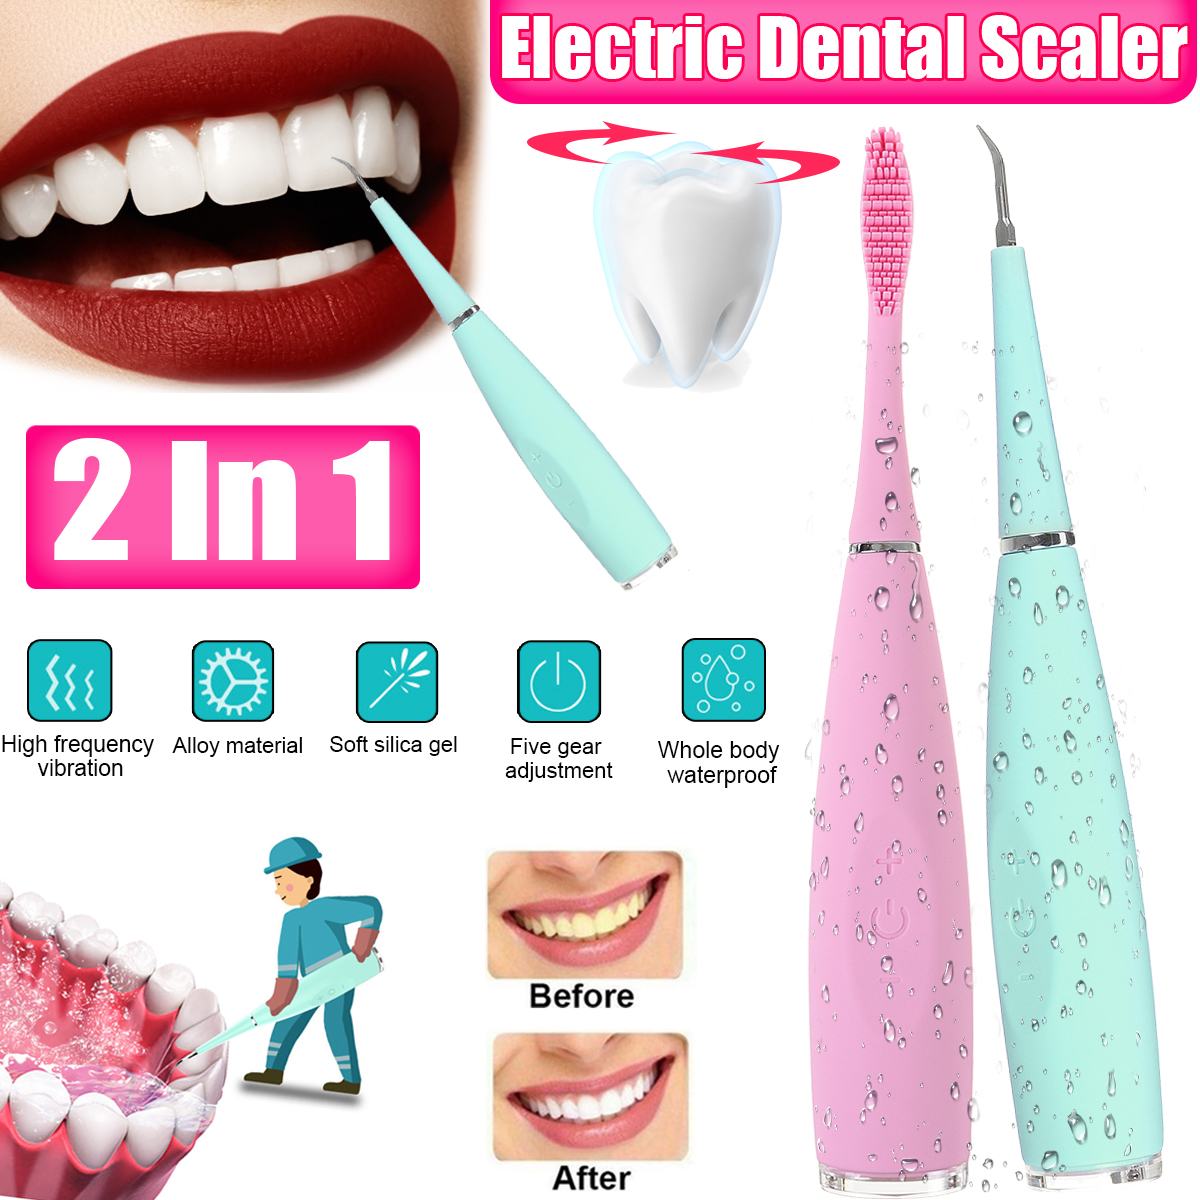 Portable-Electric-Ultrasonic-Dental-Scaler-5-Gears-Waterproof-Sonic-Tooth-Calculus-Remover-1781937-1